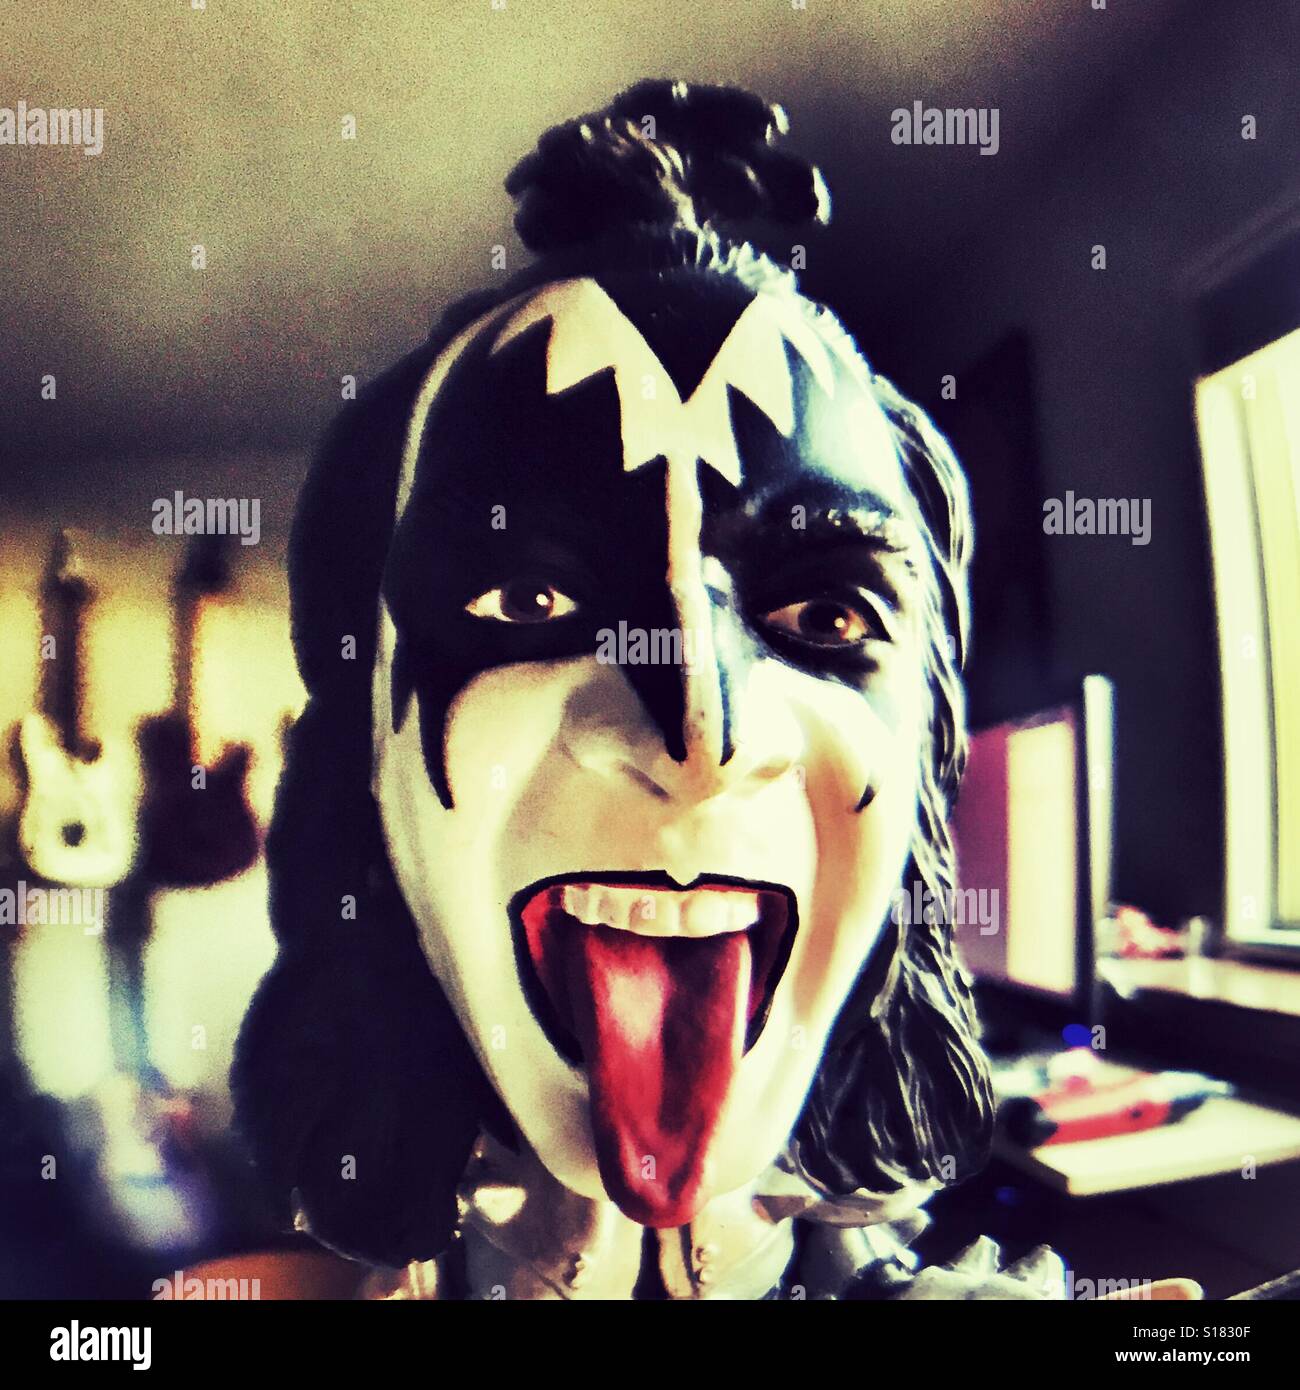 Replica of Gene Simmons from KISS with tongue sticking out Stock Photo